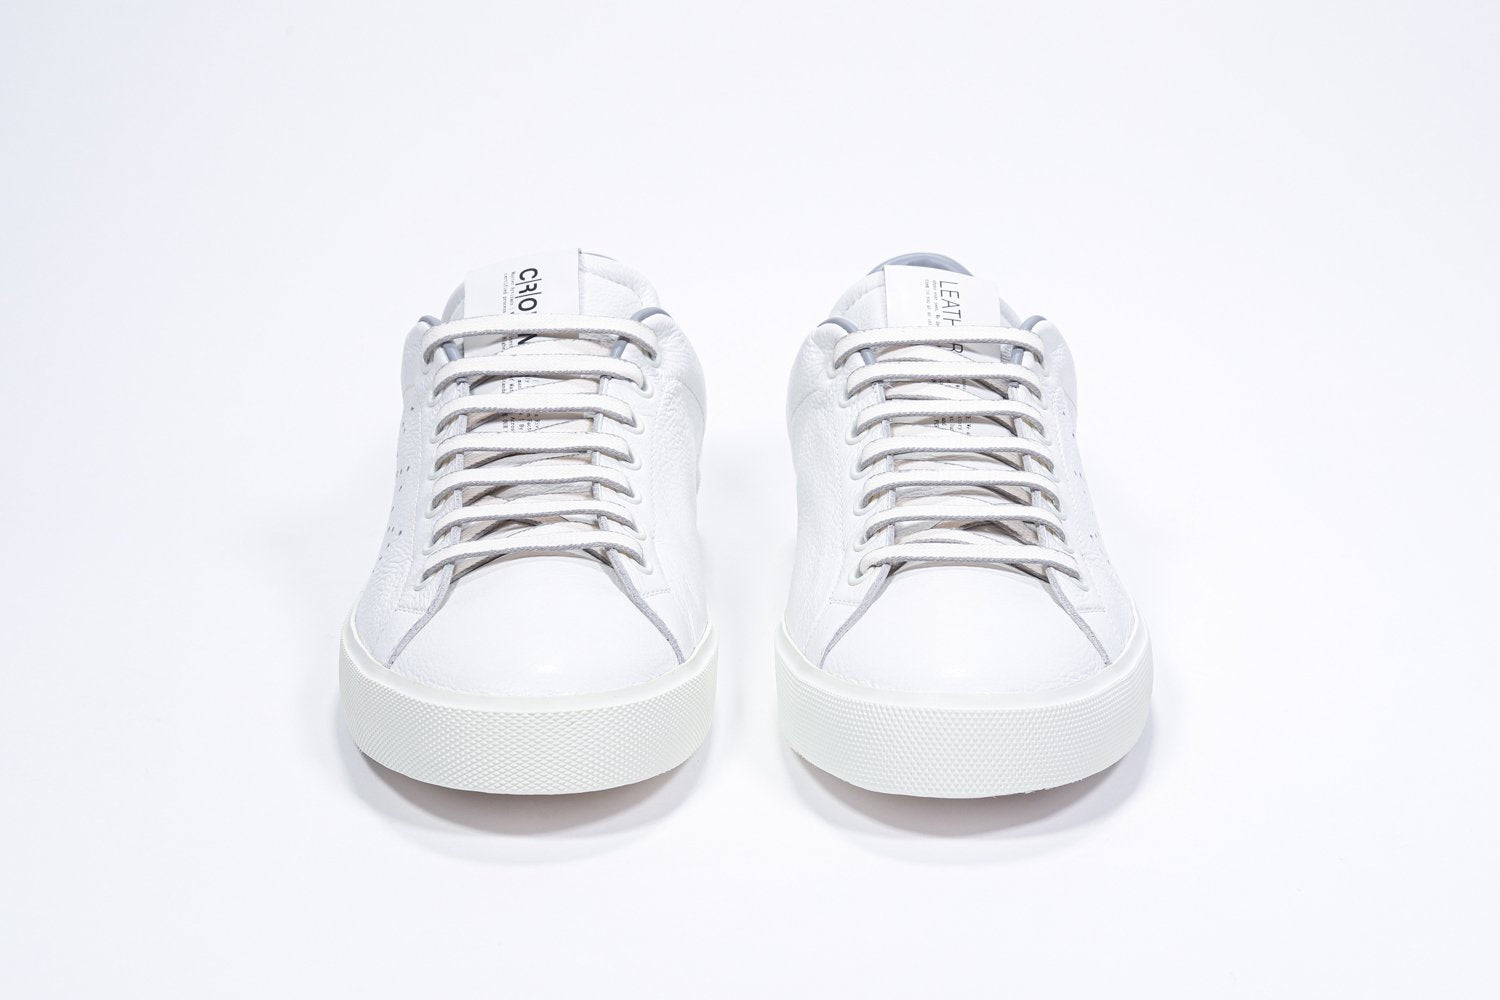 Front view of low top white sneaker with light grey detailing and perforated crown logo on upper. Full leather upper and white rubber sole.